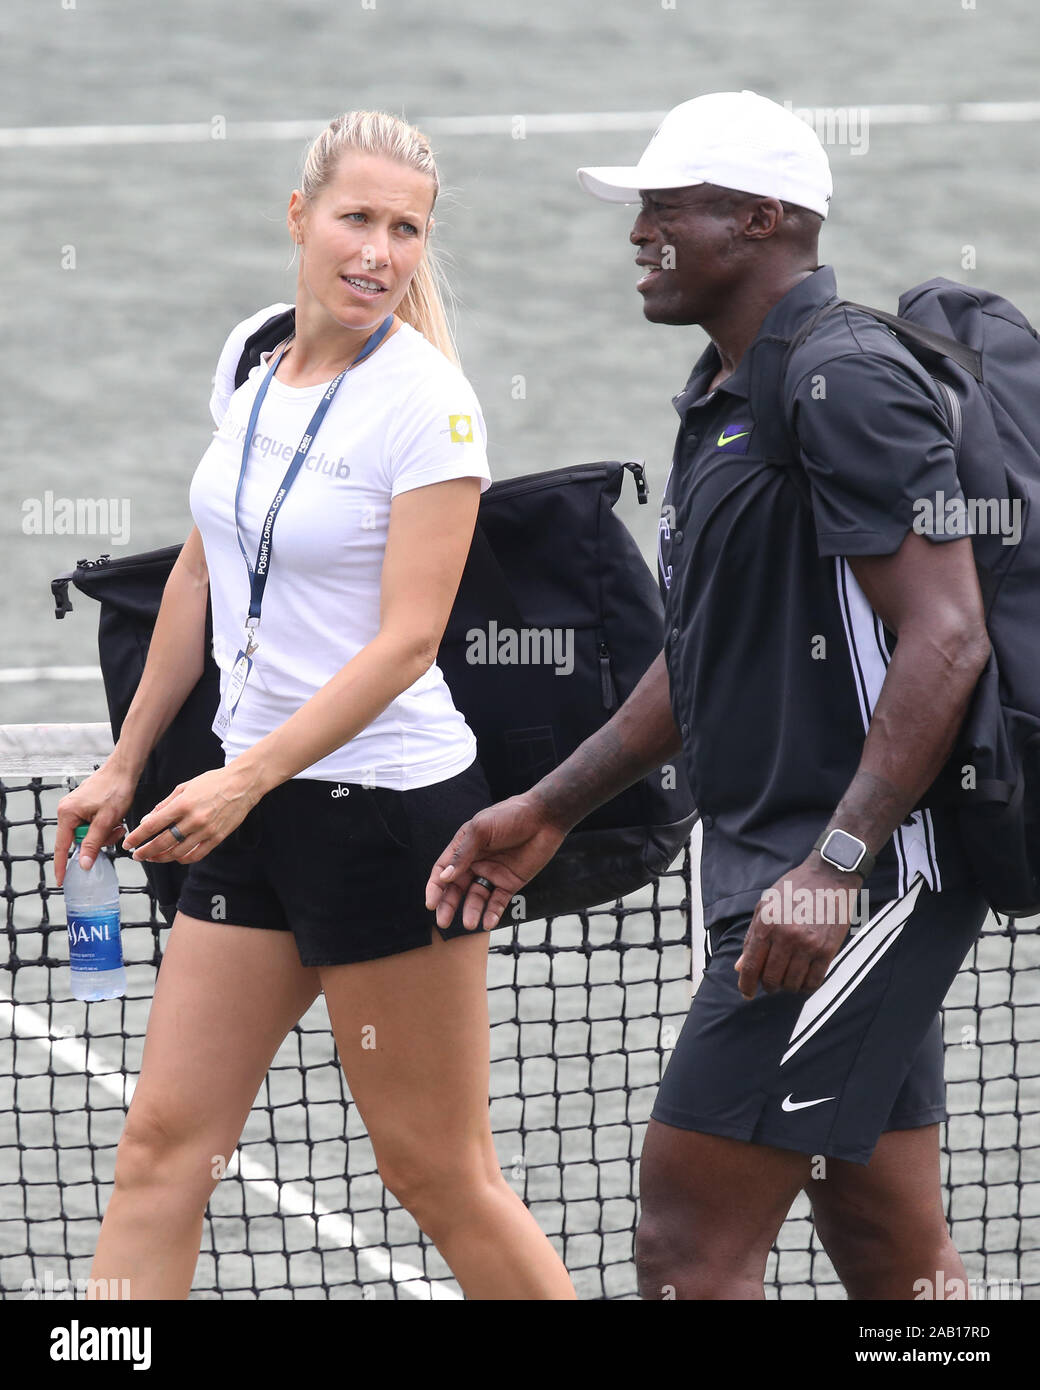 Delray Beach, Florida, USA. 24th November, 2019. Seal and his new slovenija  tennis pro girlfriend Tina Hojnik have a tender private moment on a side  court after they participated in the 30TH